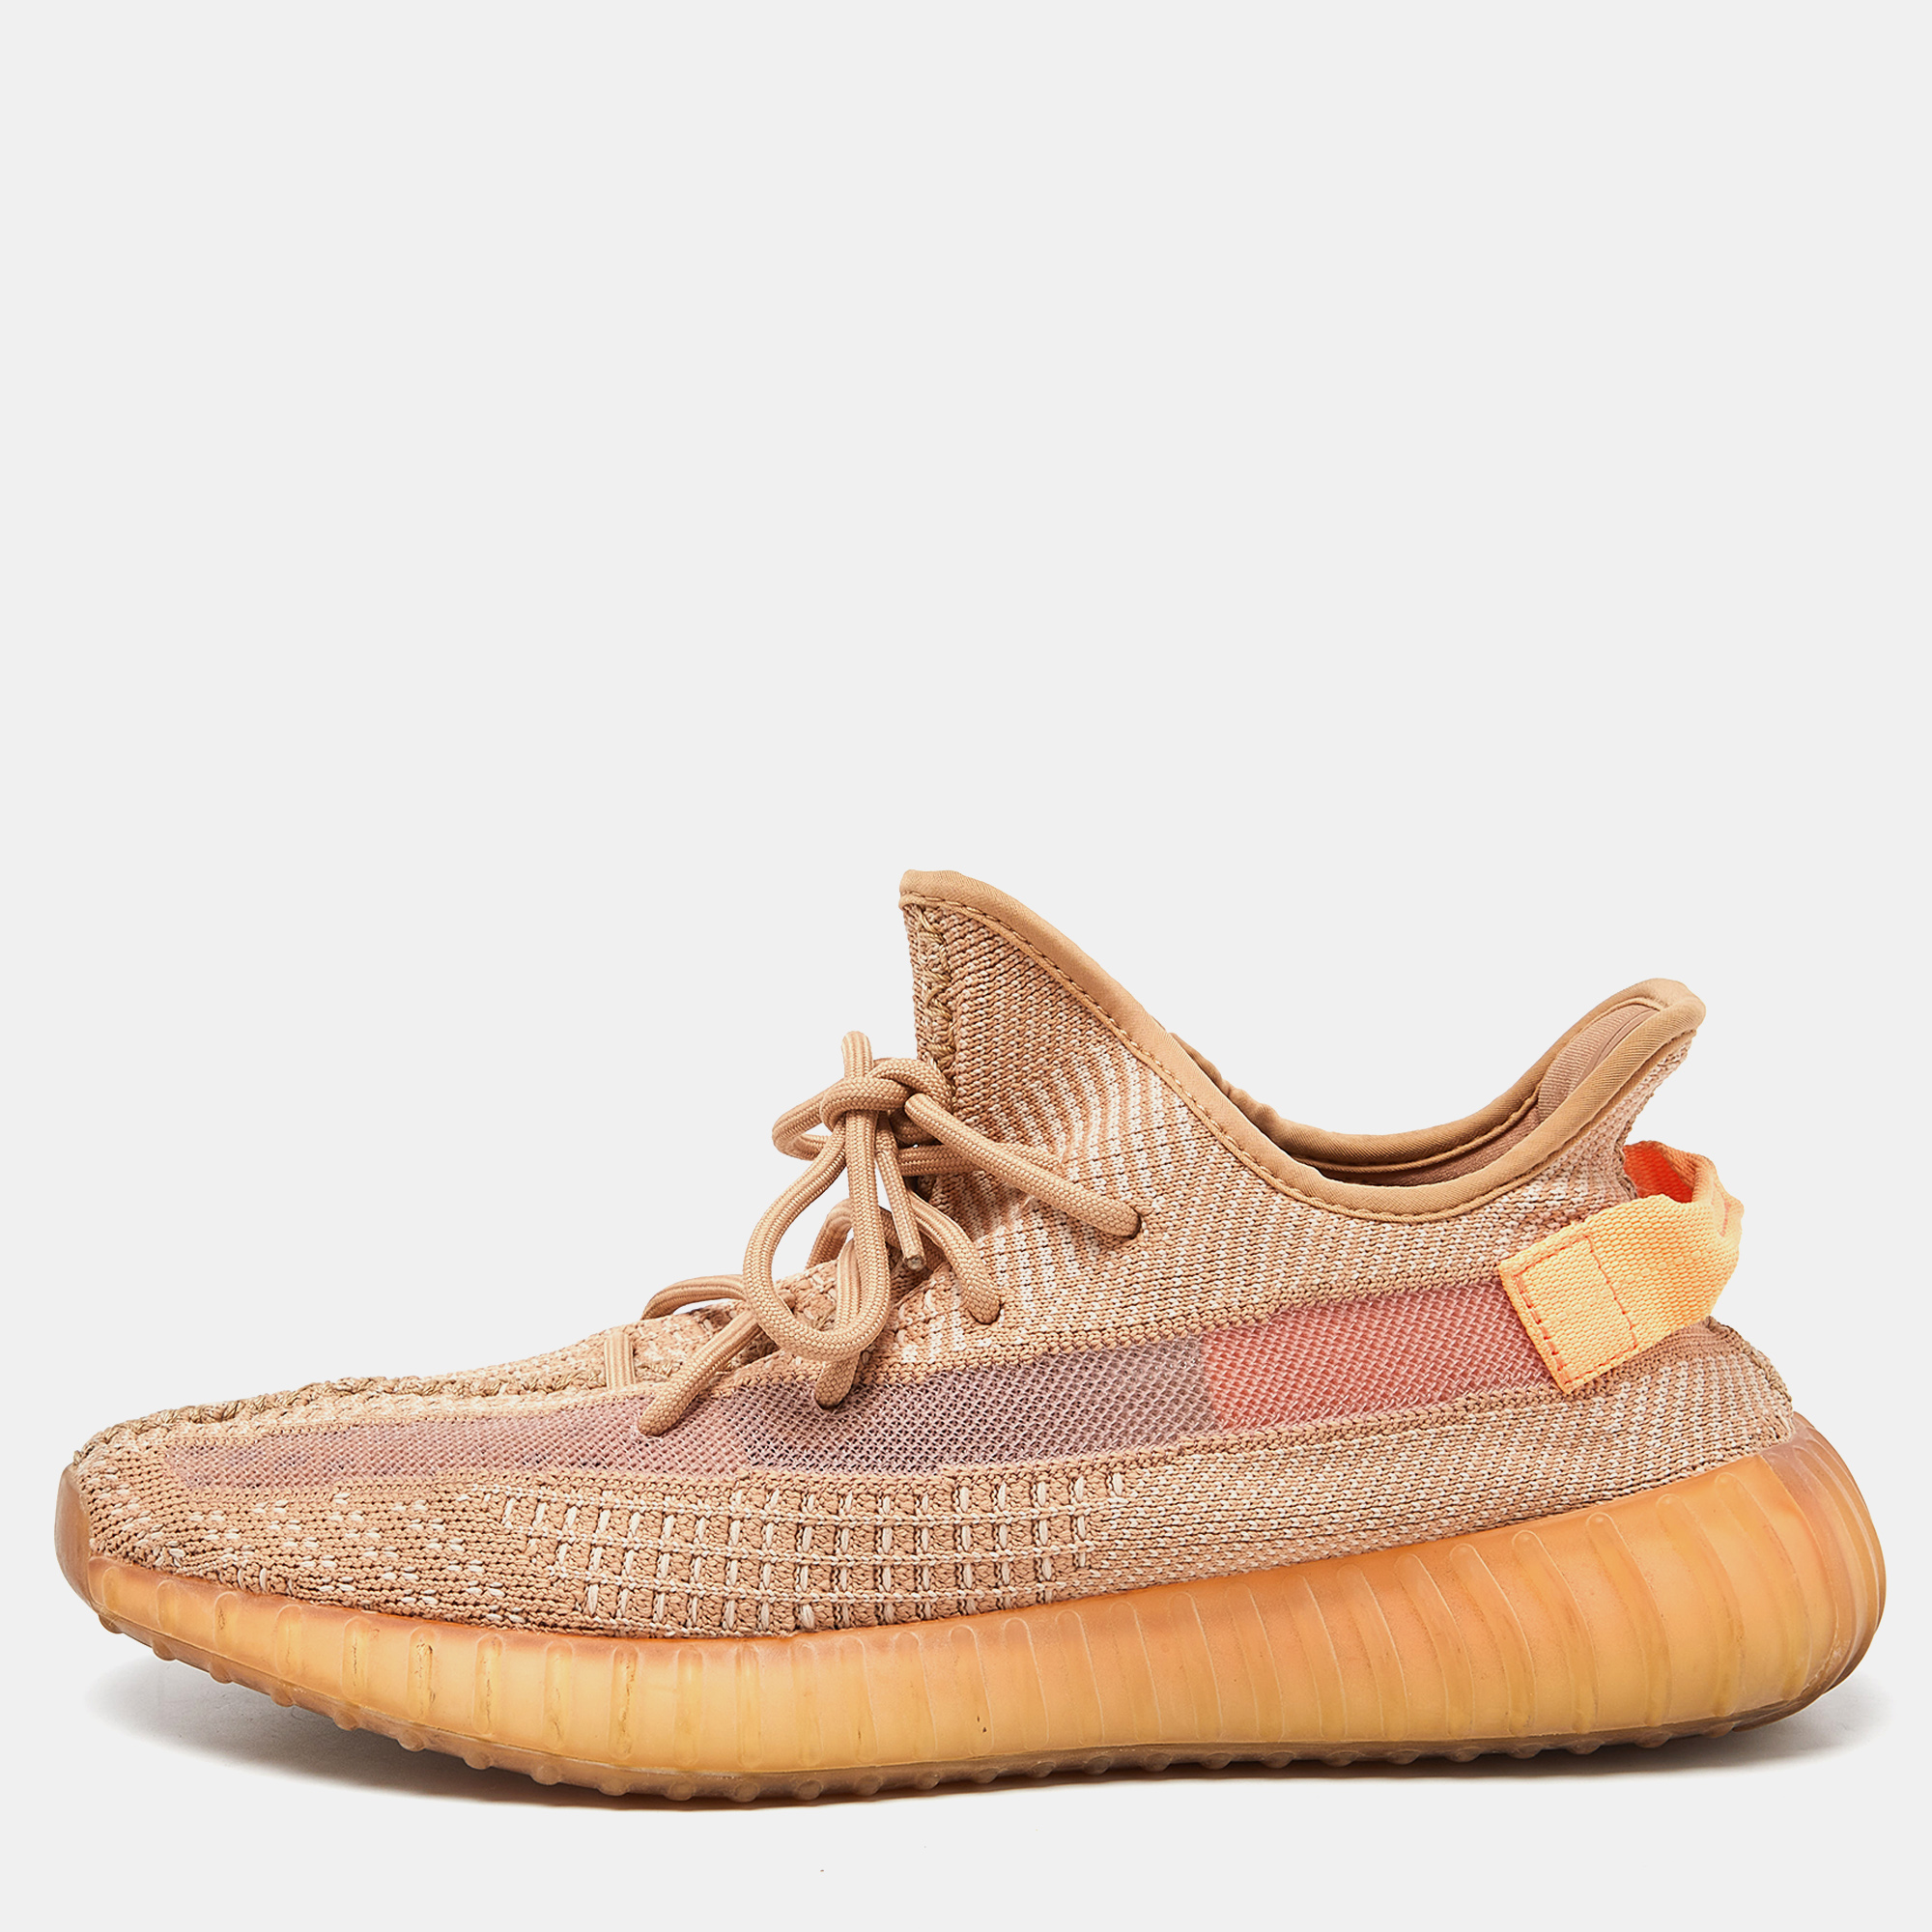 

Yeezy x Adidas Orange Knit Fabric Boost 350 V2 Clay Sneakers Size 44 2/3